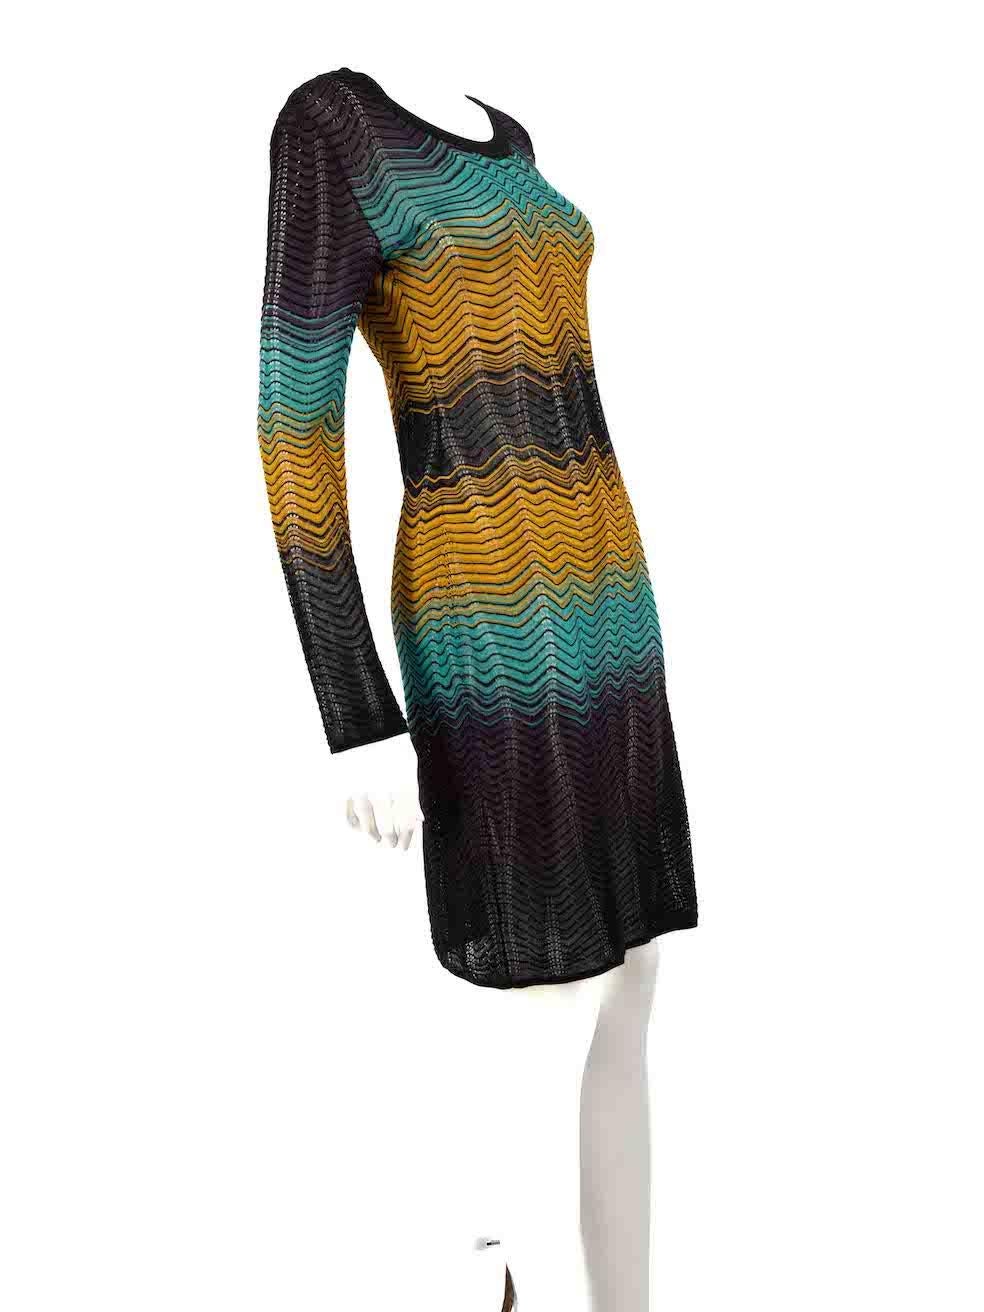 CONDITION is Very good. Hardly any visible wear to dress is evident on this used M by Missoni designer resale item.
 
 
 
 Details
 
 
 Multicolour
 
 Viscose
 
 Knit dress
 
 Sheer
 
 Striped pattern
 
 Long sleeves
 
 Midi
 
 Round neck
 
 
 
 
 
